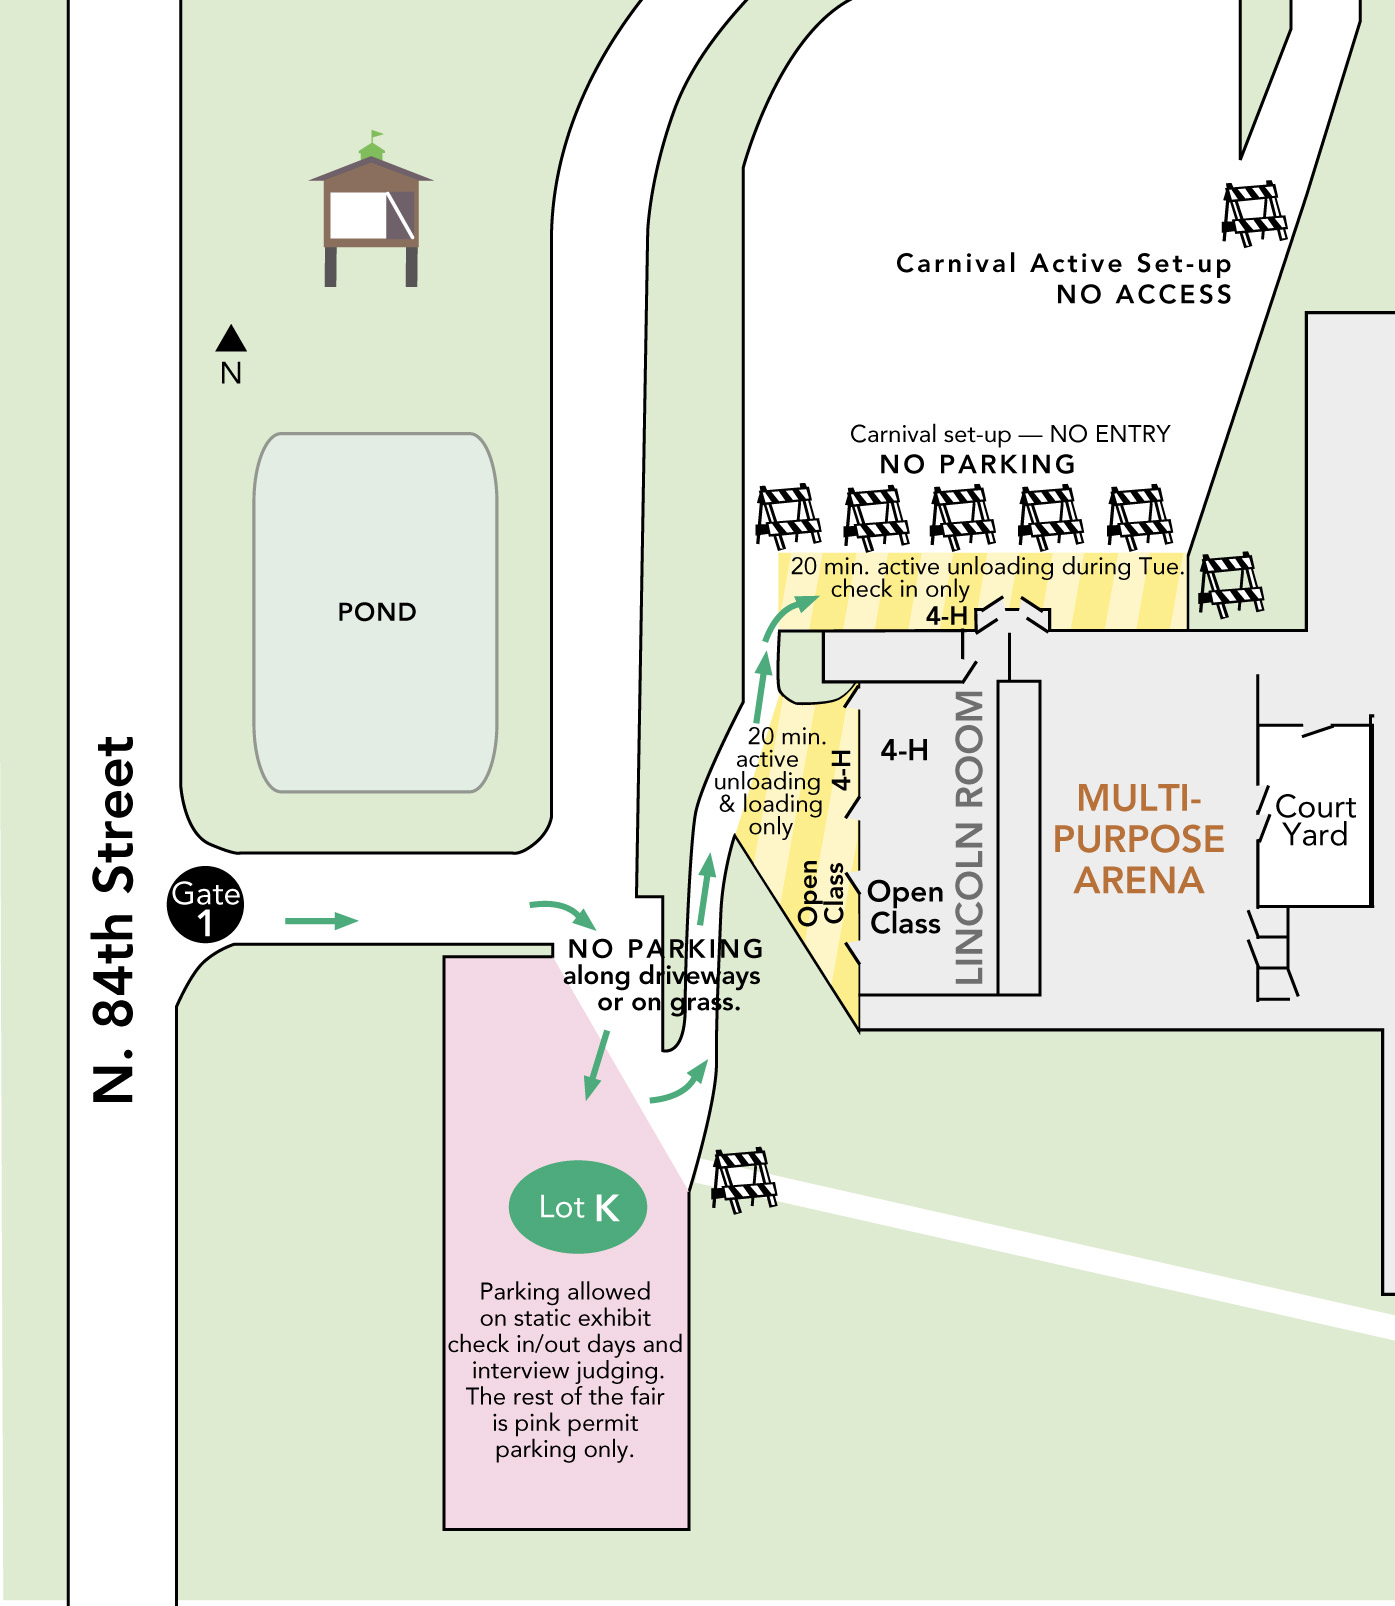 Map showing parking for static exhibit check-in/out ad interview judging days only.